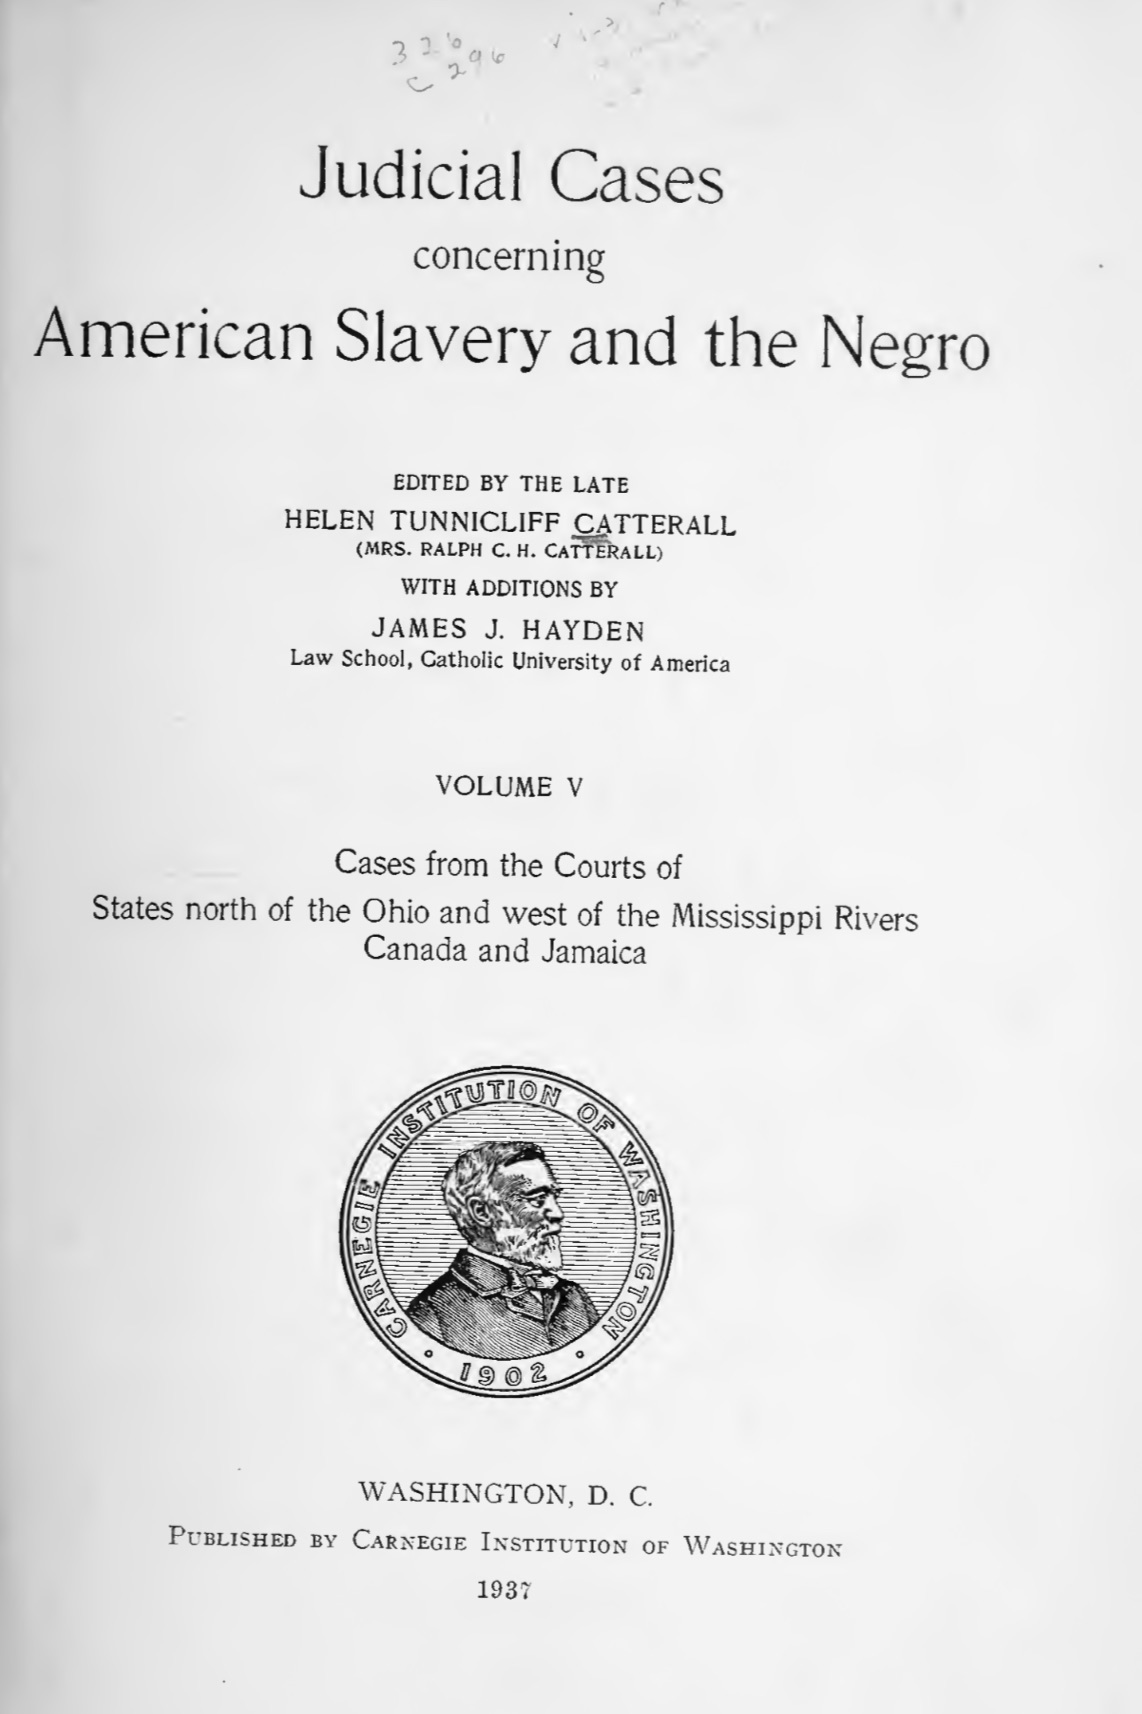 Judicial cases concerning American slavery and the Negro - V Cover